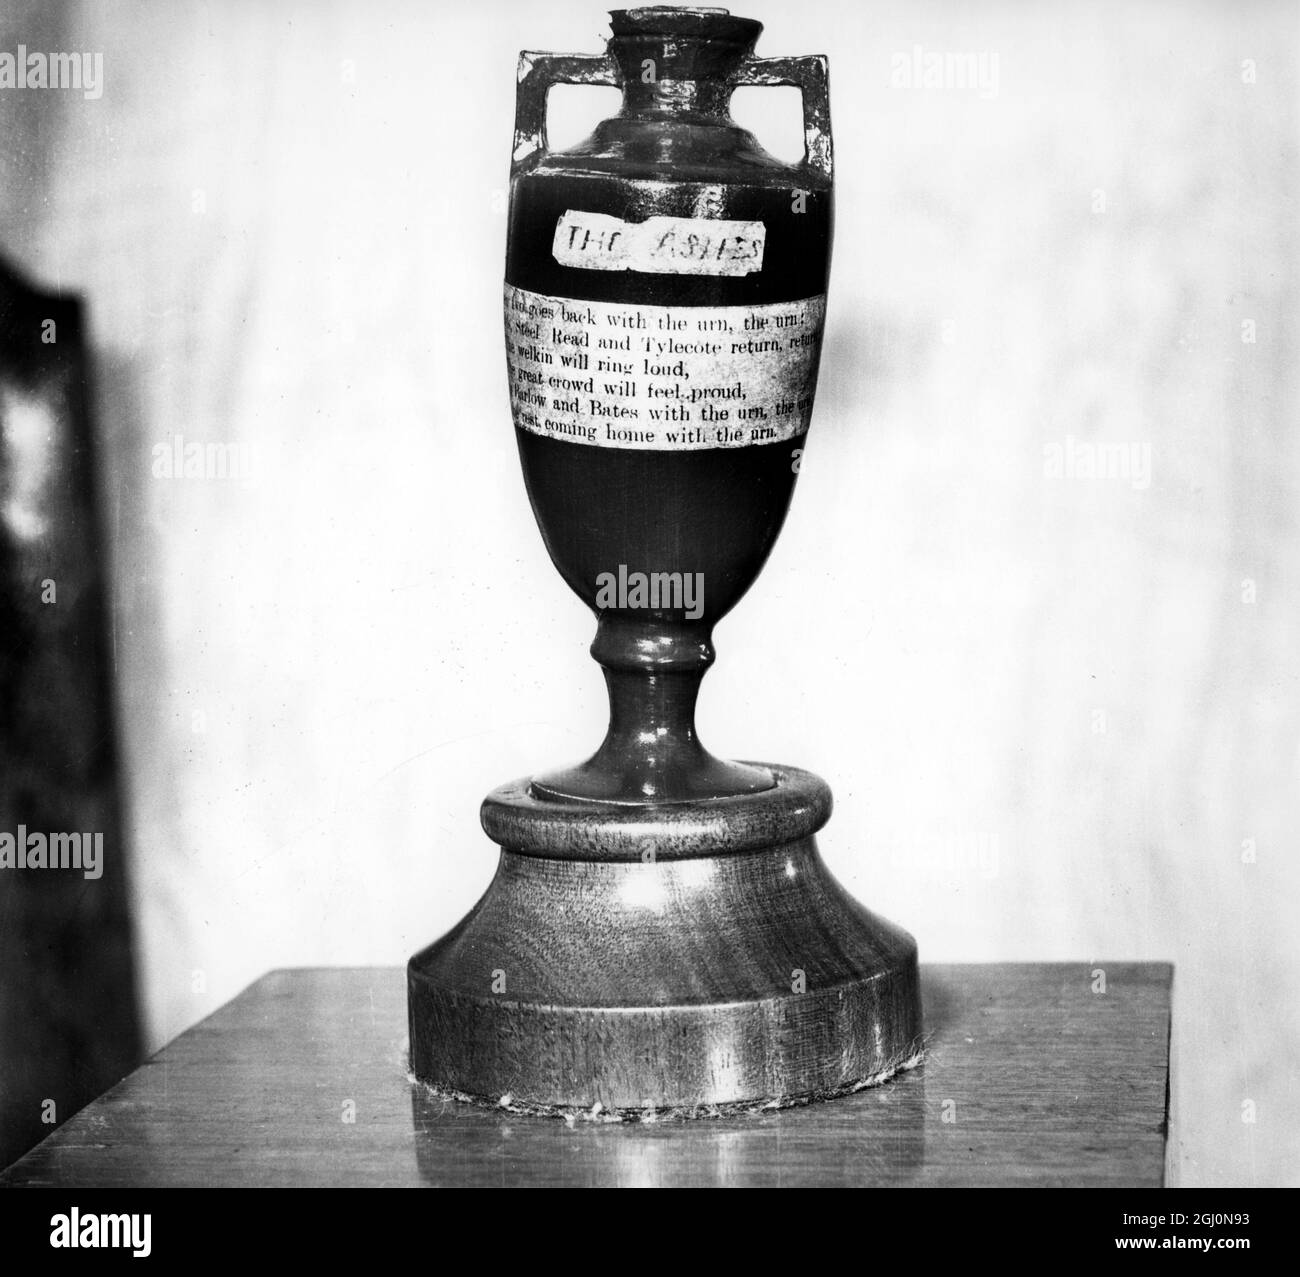 The Ashes Urn - which was presented to England captain Ivo Bligh in 1882 by a group of Melbourne women. The contents of the urn are reputed to be the ashes of an item of cricket equipment, possibly a bail, ball or stump. The series is named after a satirical obituary published in a British newspaper, The Sporting Times, in 1882 after a match at The Oval in which Australia beat England on an English ground for the first time. The obituary stated that English cricket had died, and the body will be cremated and the ashes taken to Australia. The English media dubbed the next English tour to Austra Stock Photo